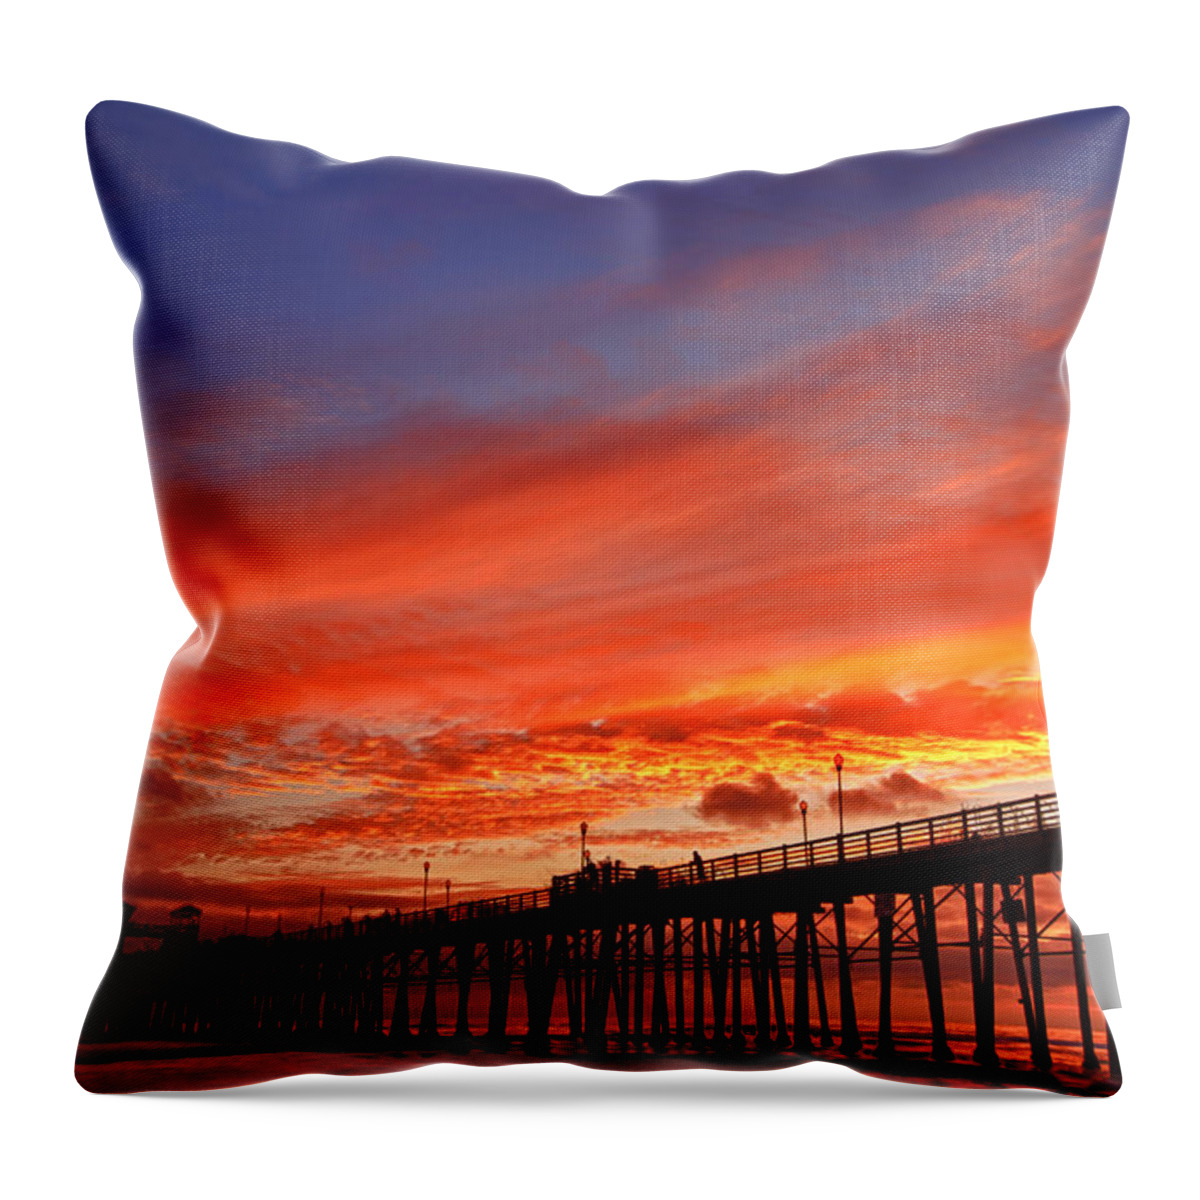 Sunset Throw Pillow featuring the photograph Oceanside Pier Sunset by Larry Marshall